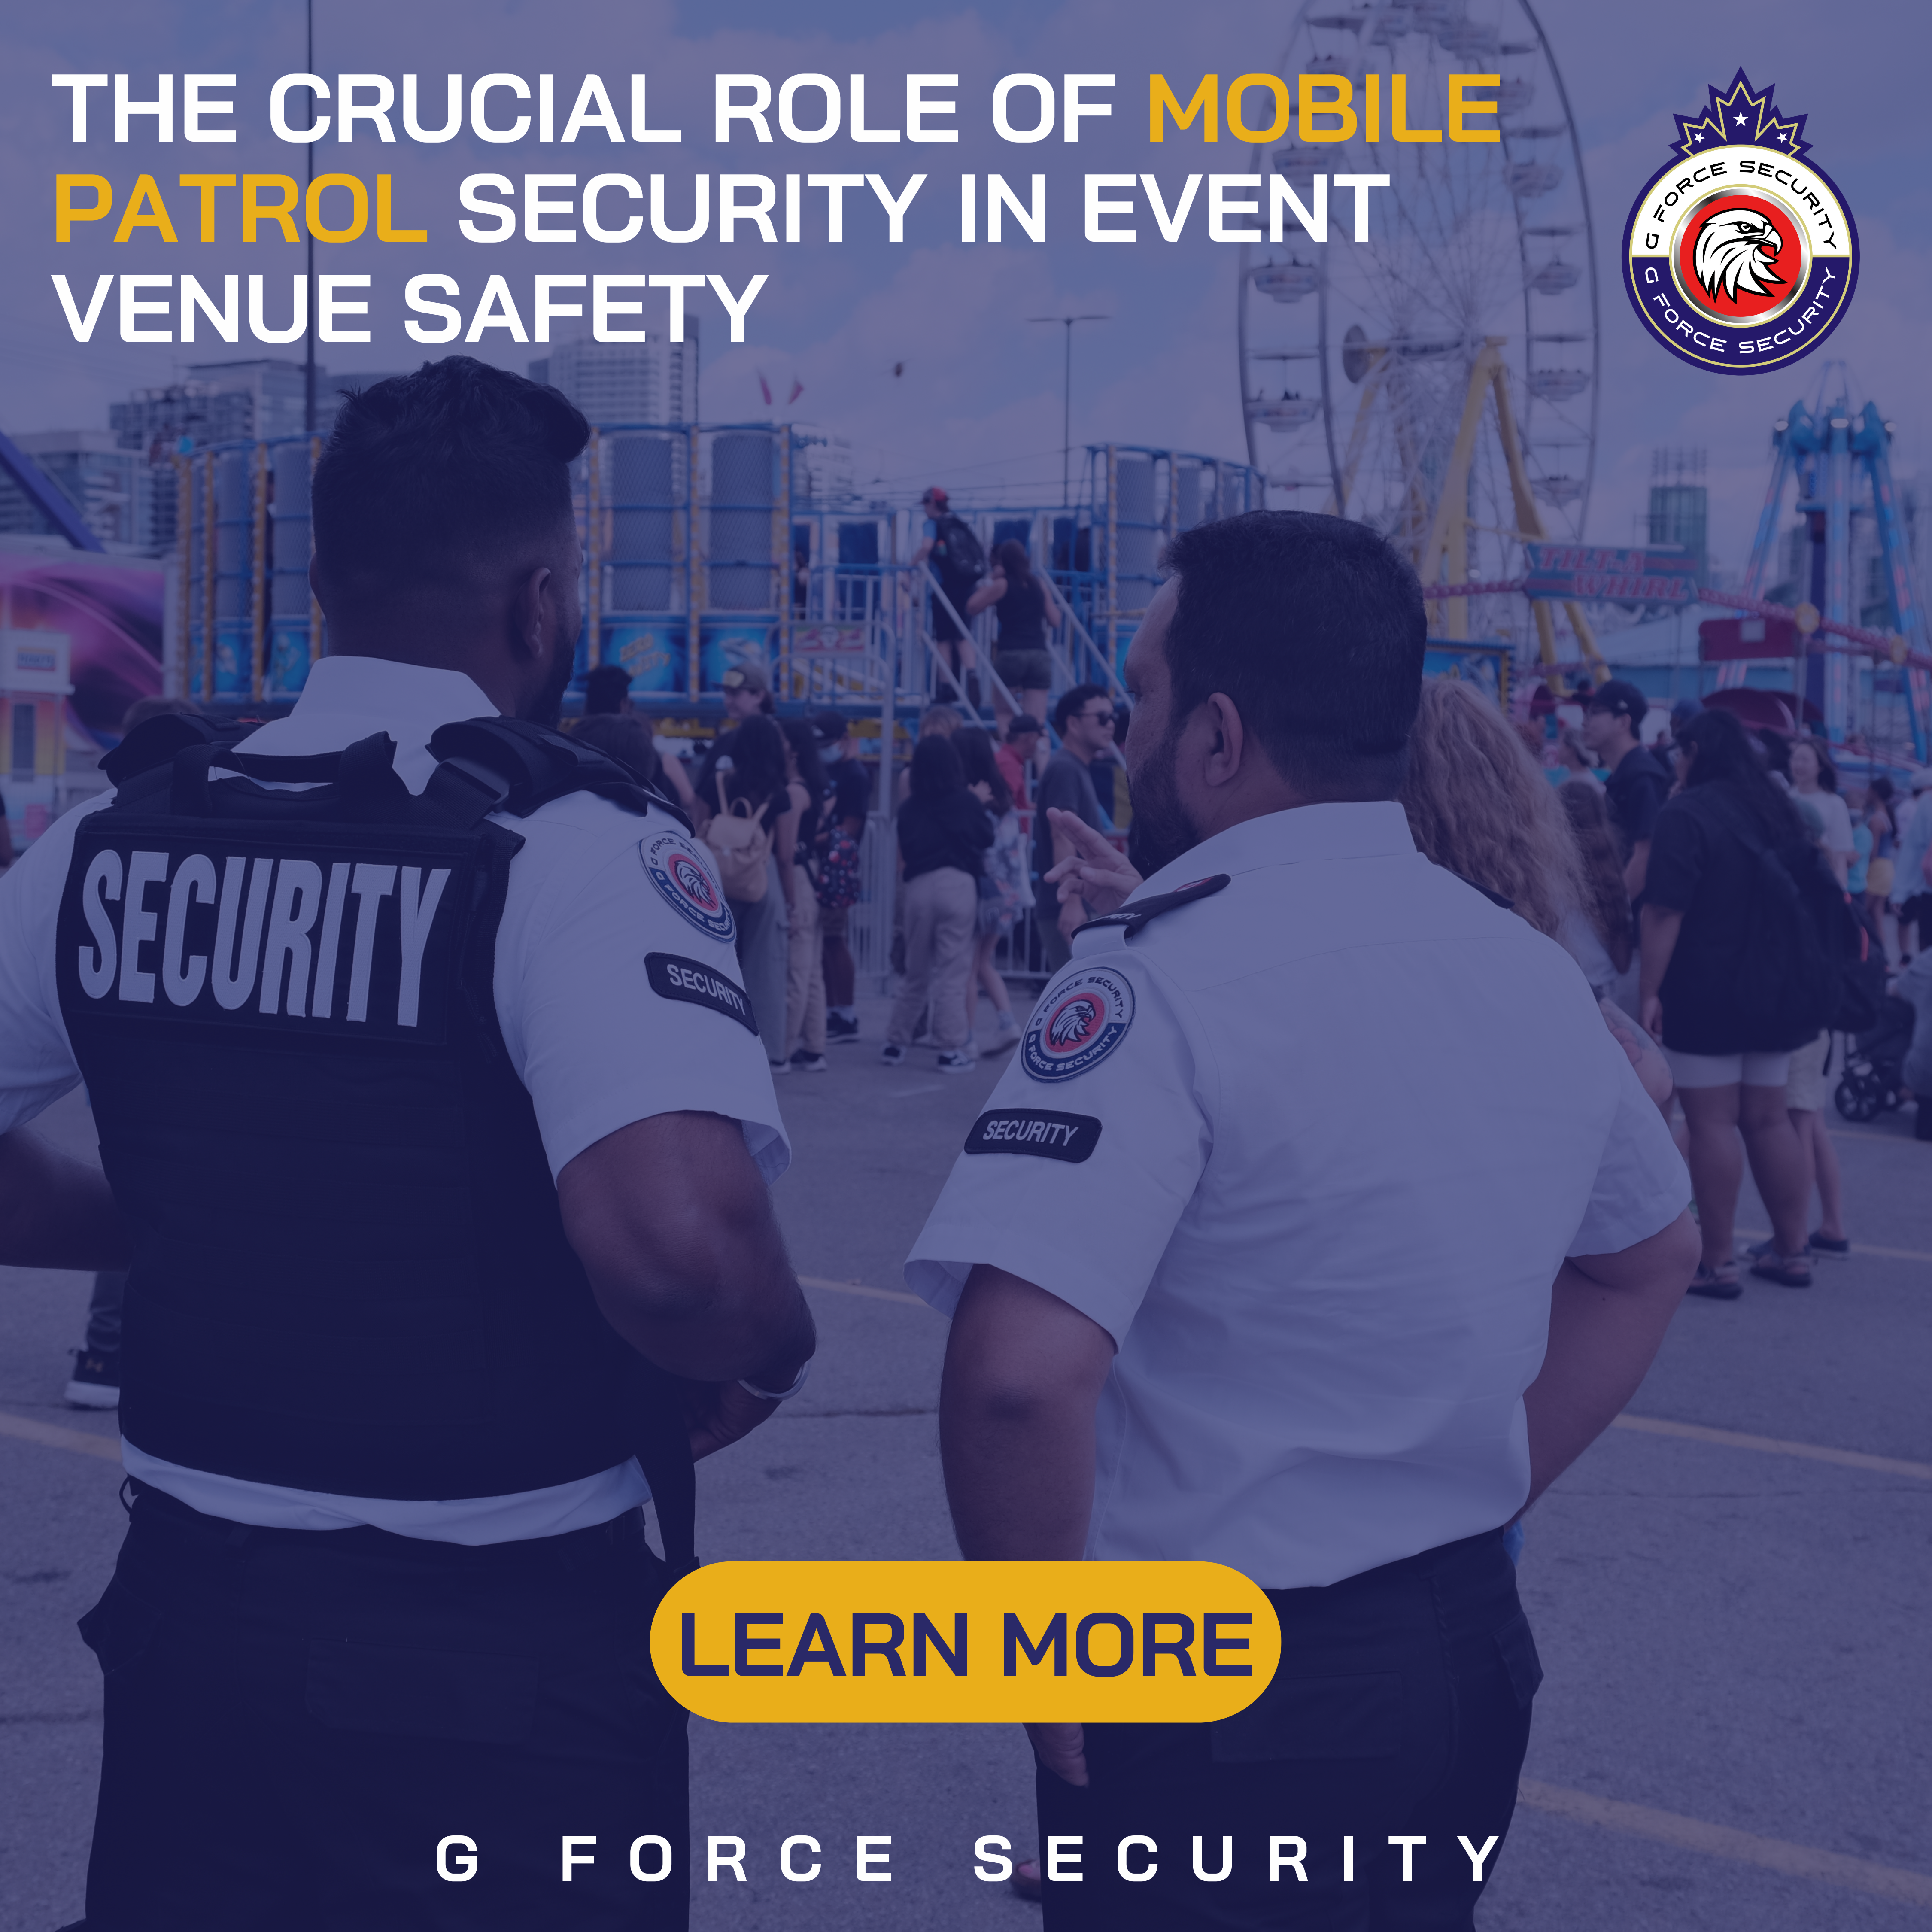 The Crucial Role of Mobile Patrol Security in Event Venue Safety